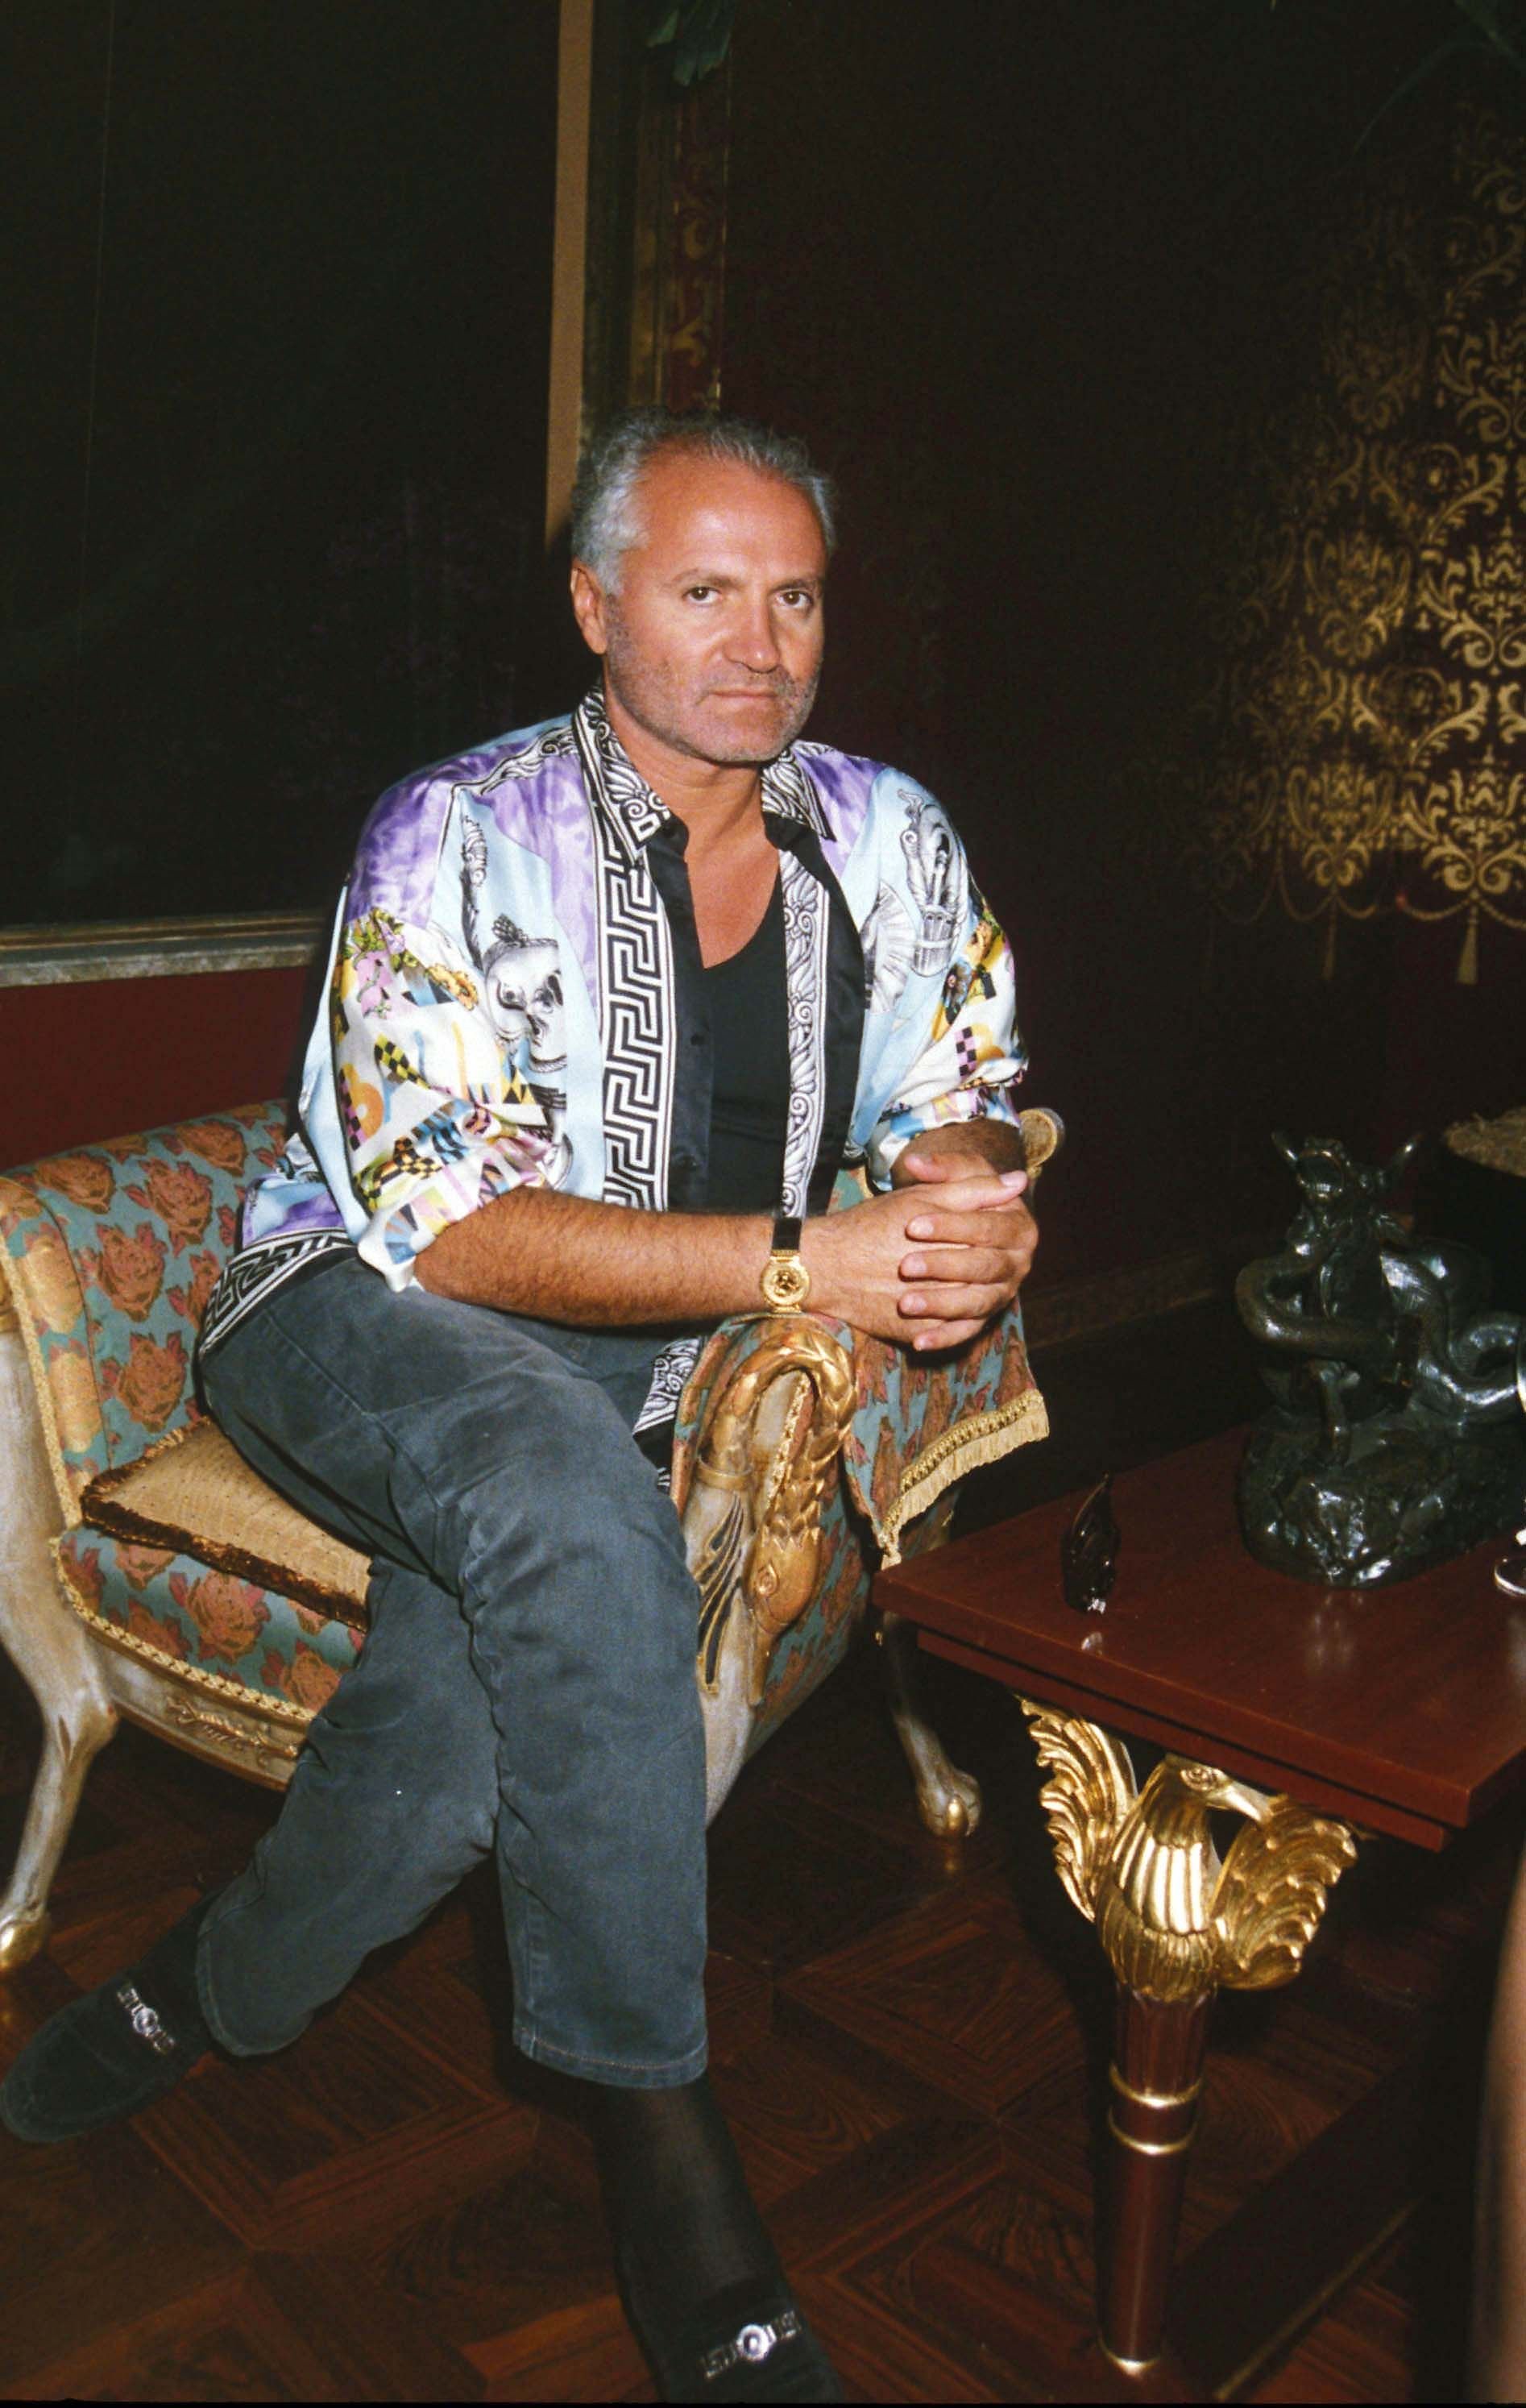 Gianni Versace at Sylvester Stallone's house warming party in the United Kingdom, circa 1991 | Photo: Dave Benett/Getty Images